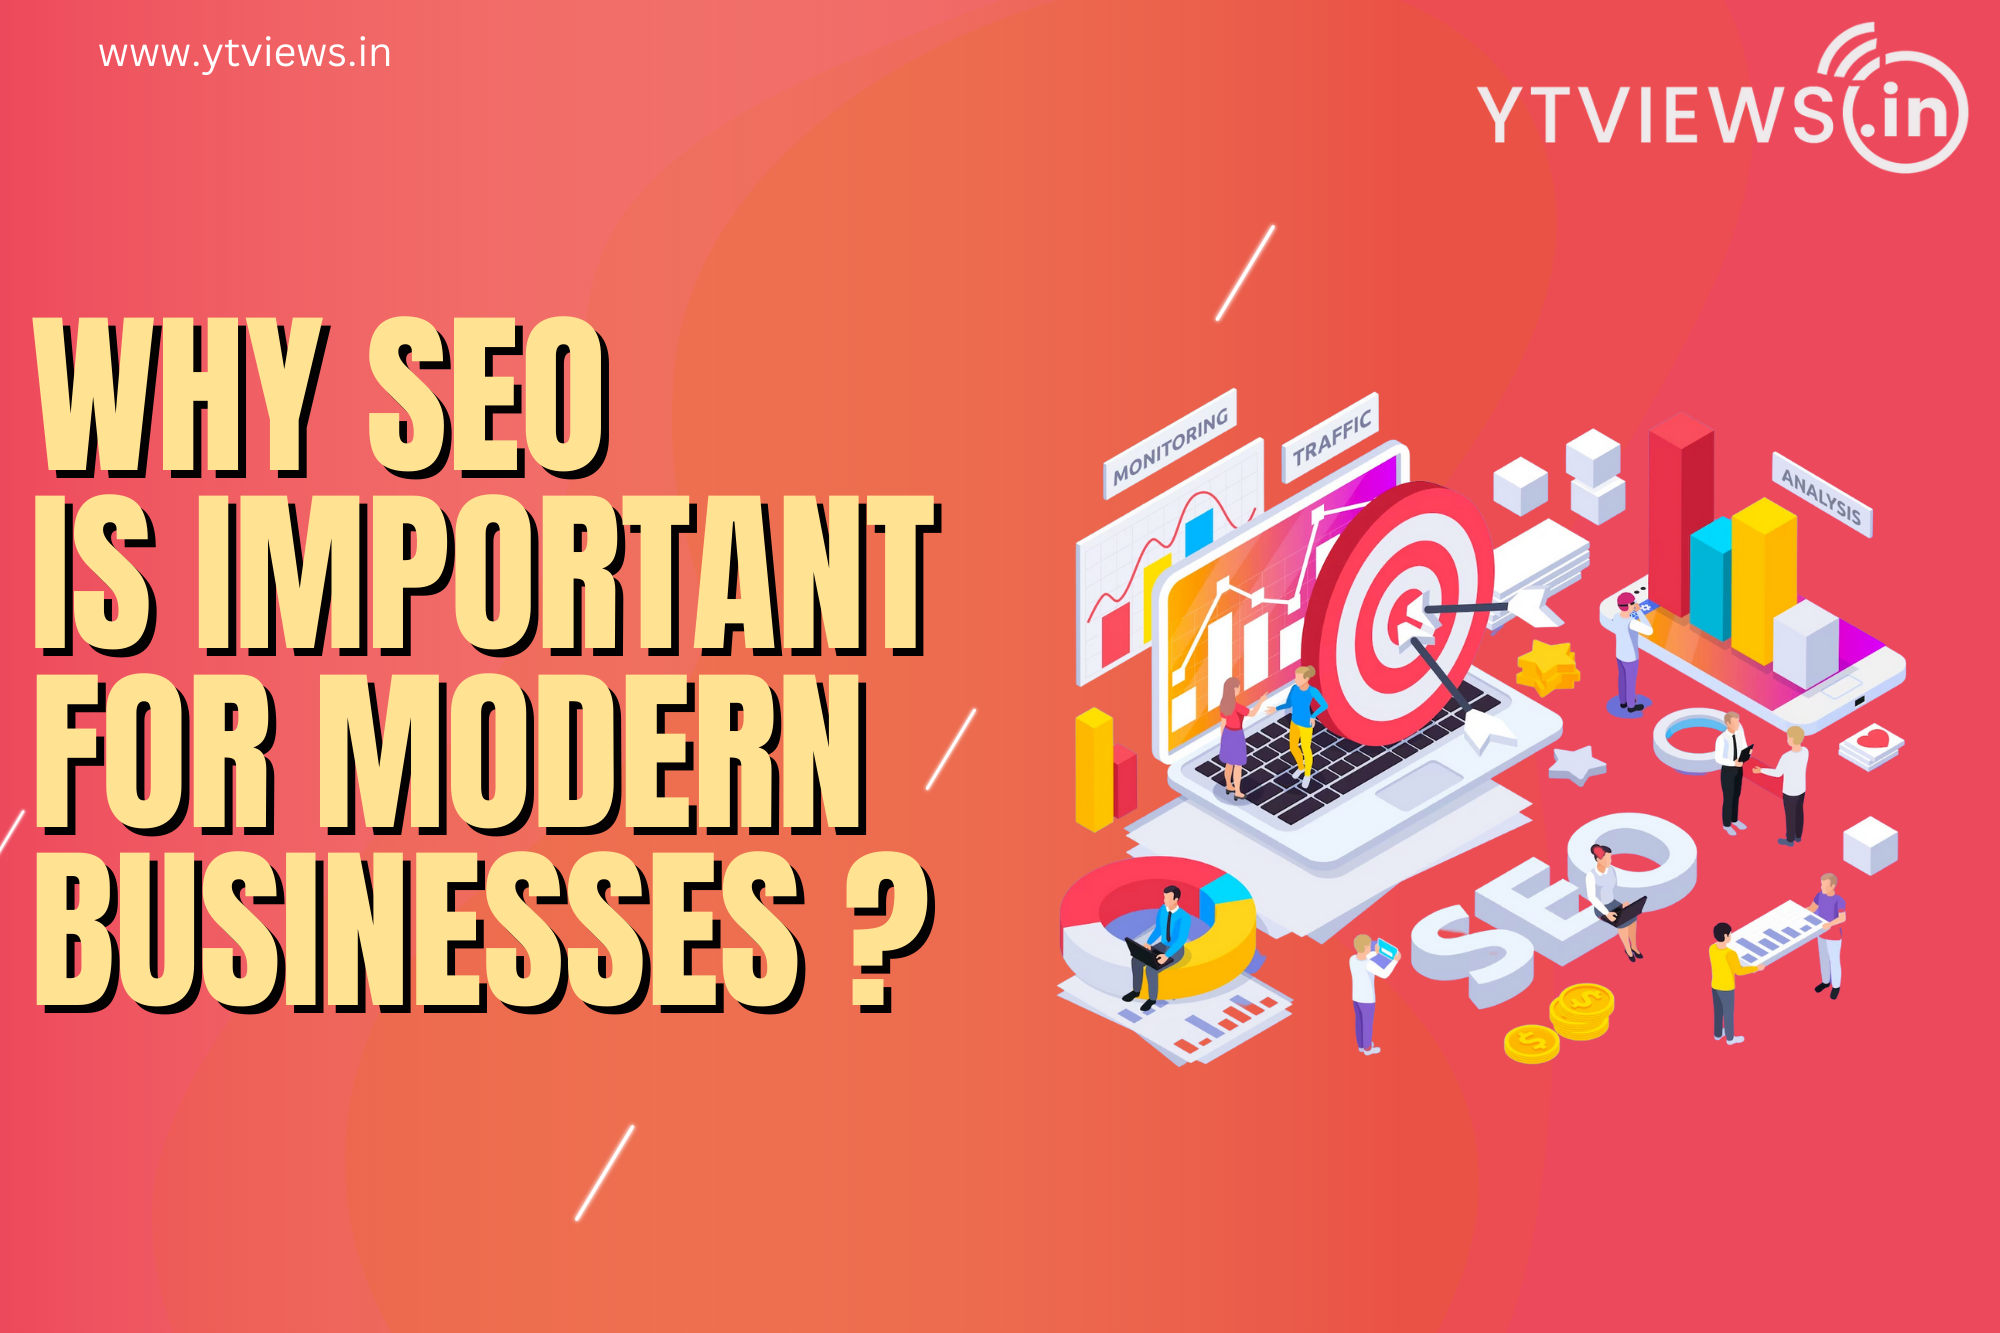 Why SEO is important for modern businesses